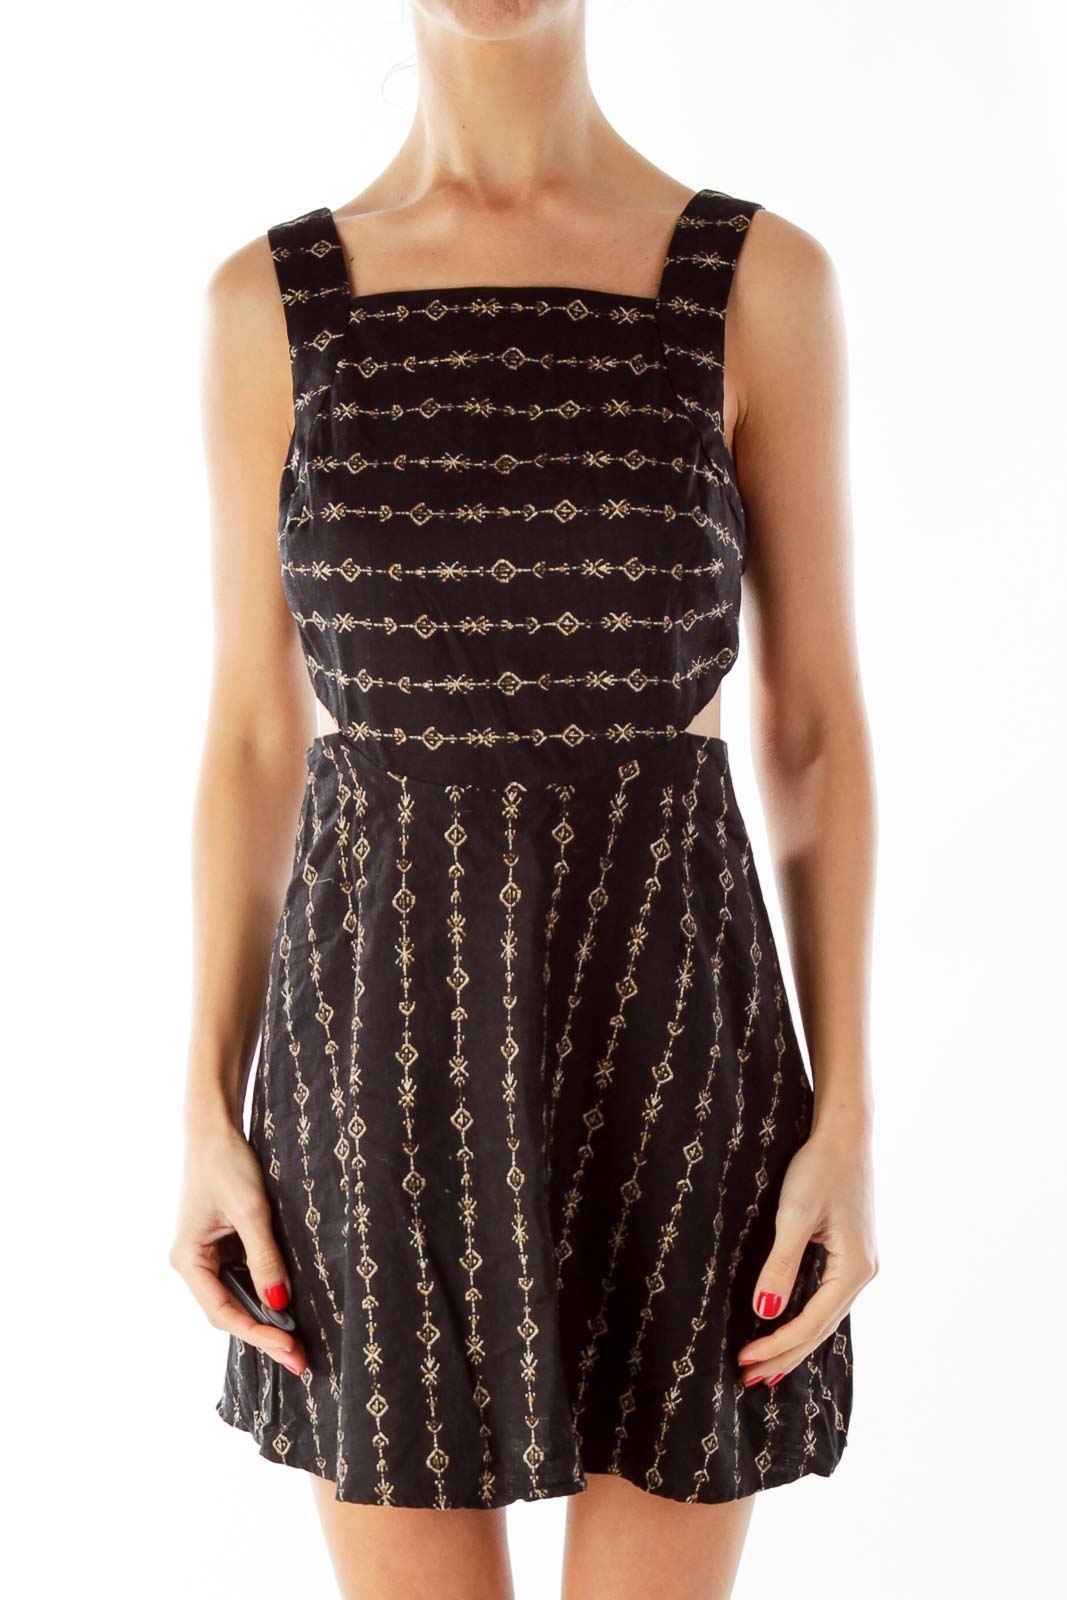 Black Beige Tribal Print Cut-Out Day Dress Front